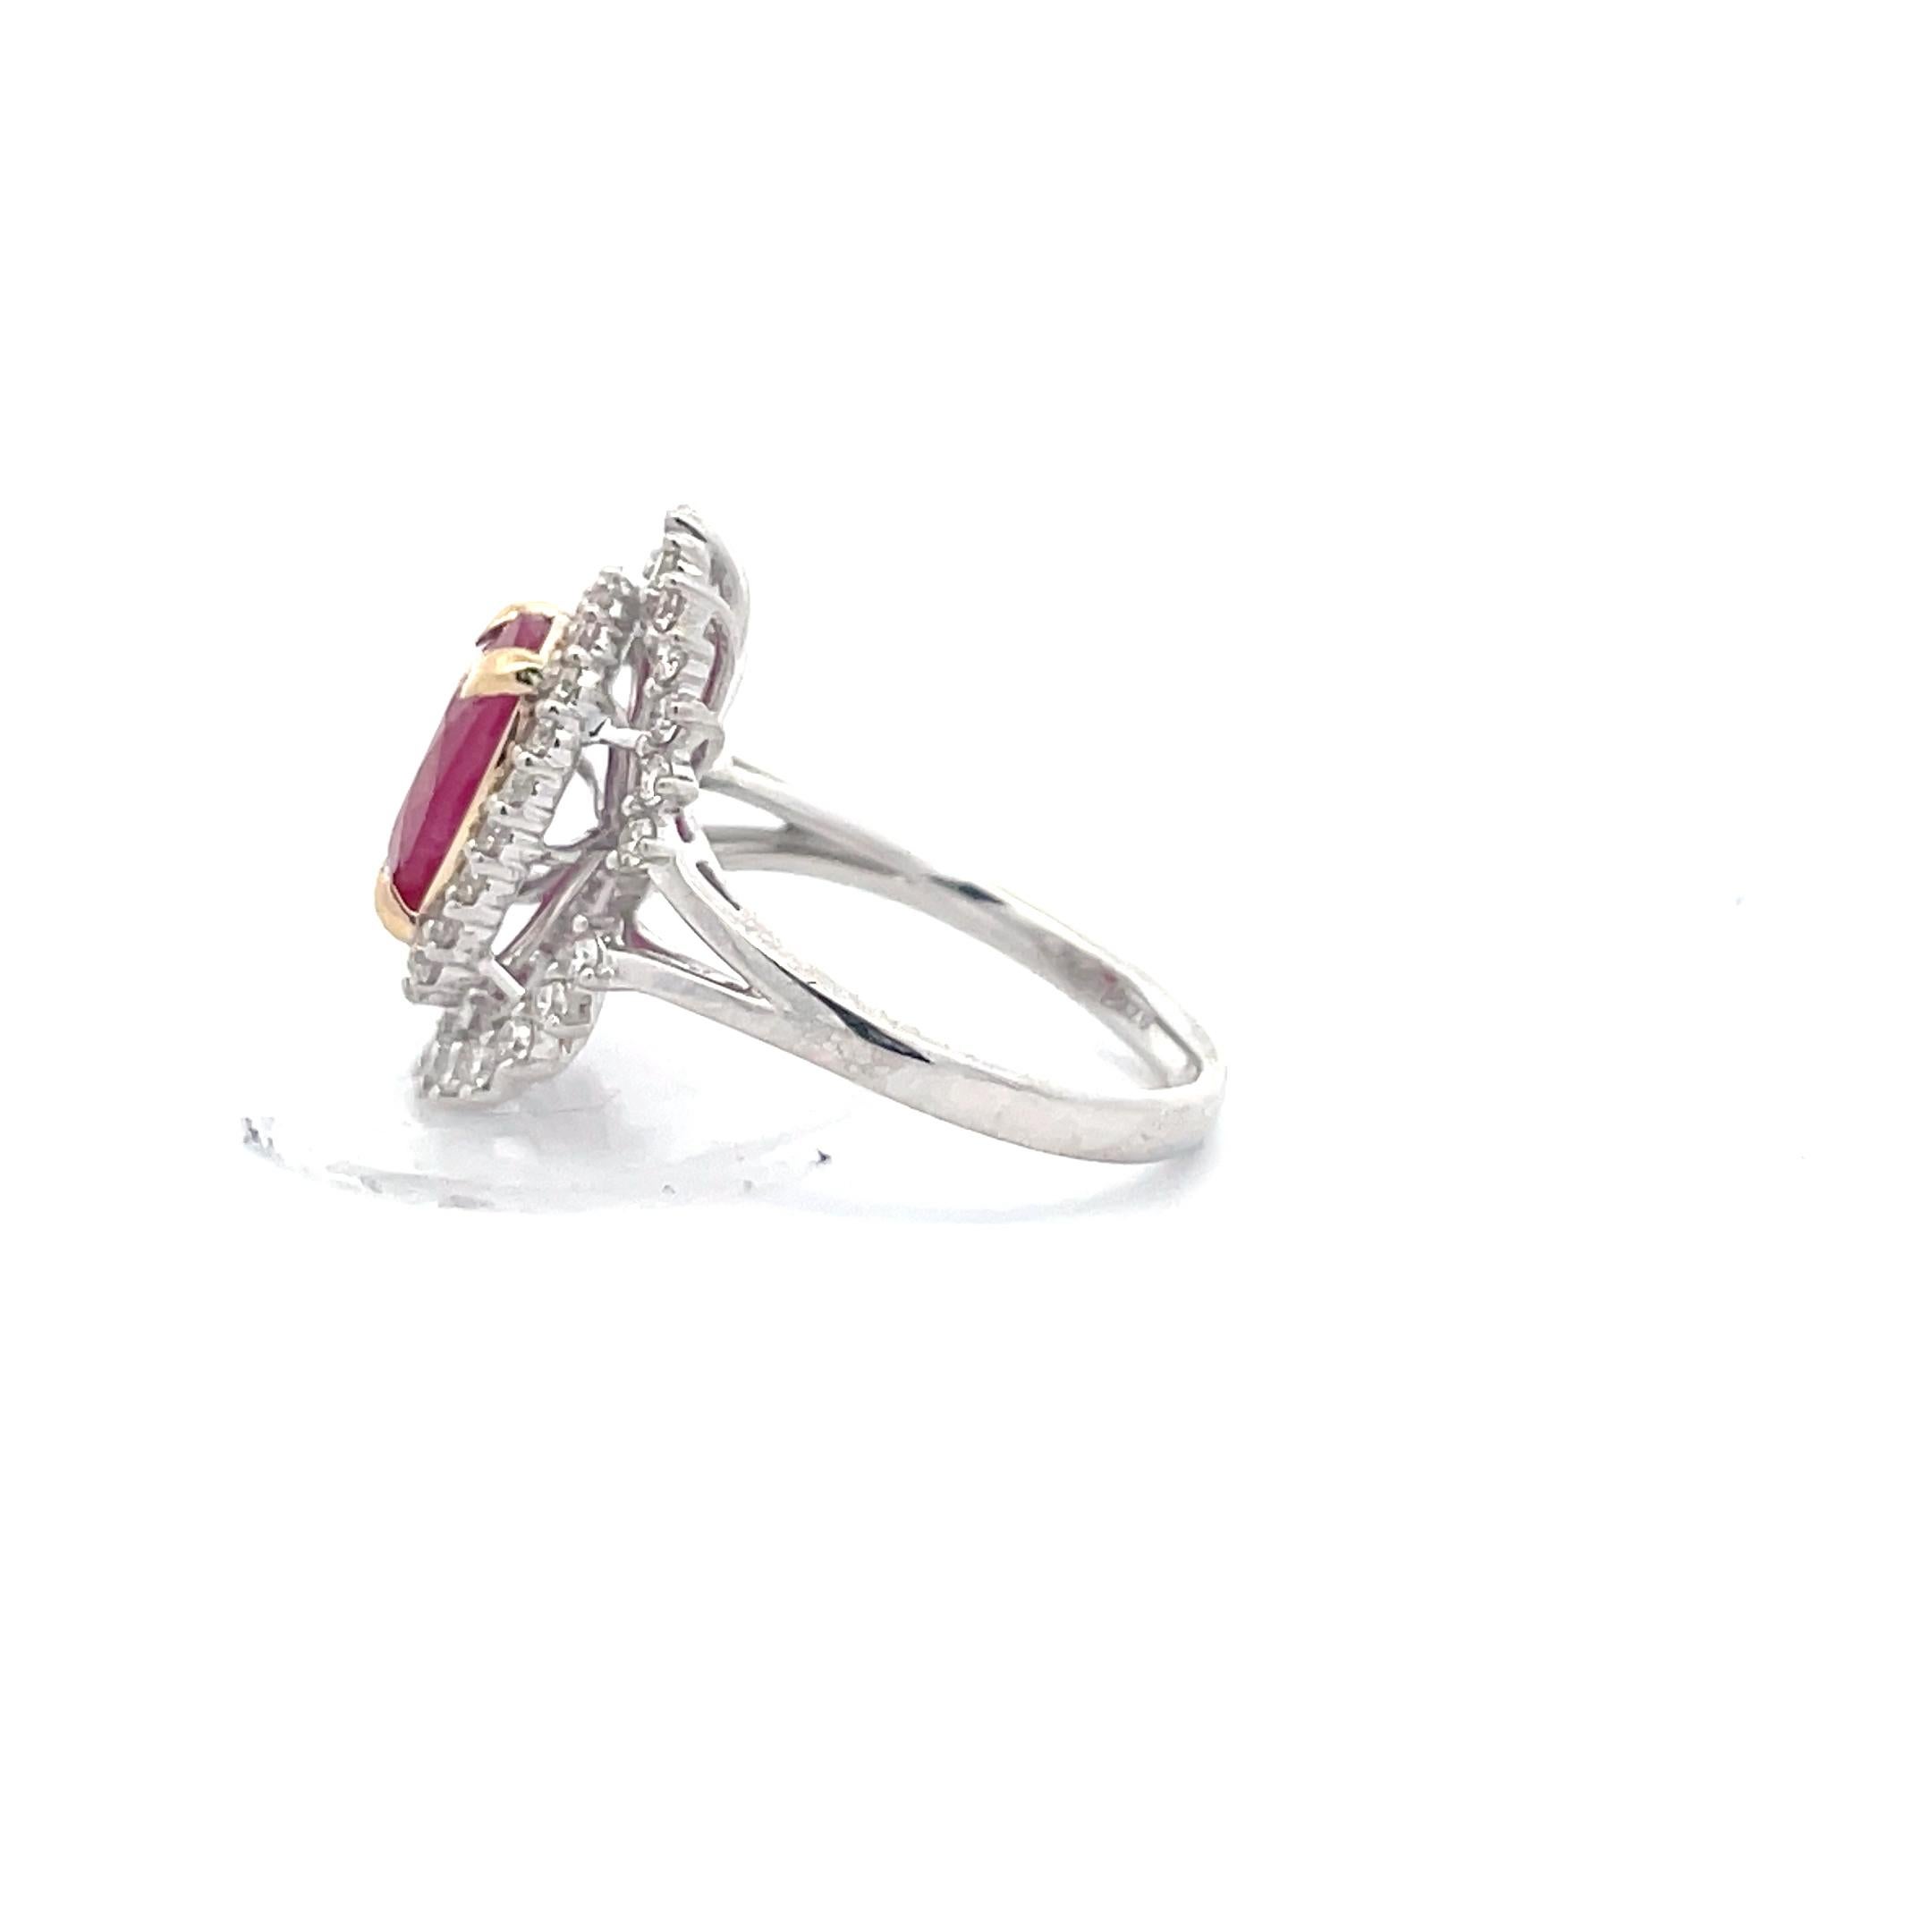 Nothing says love like a ruby ring. With a stunning Oval-cut center stone and diamond halo setting, this 3.0 carat ring is an heirloom piece to be cherished for years to come. Handcrafted by our master artisans, this design combines 14K white gold